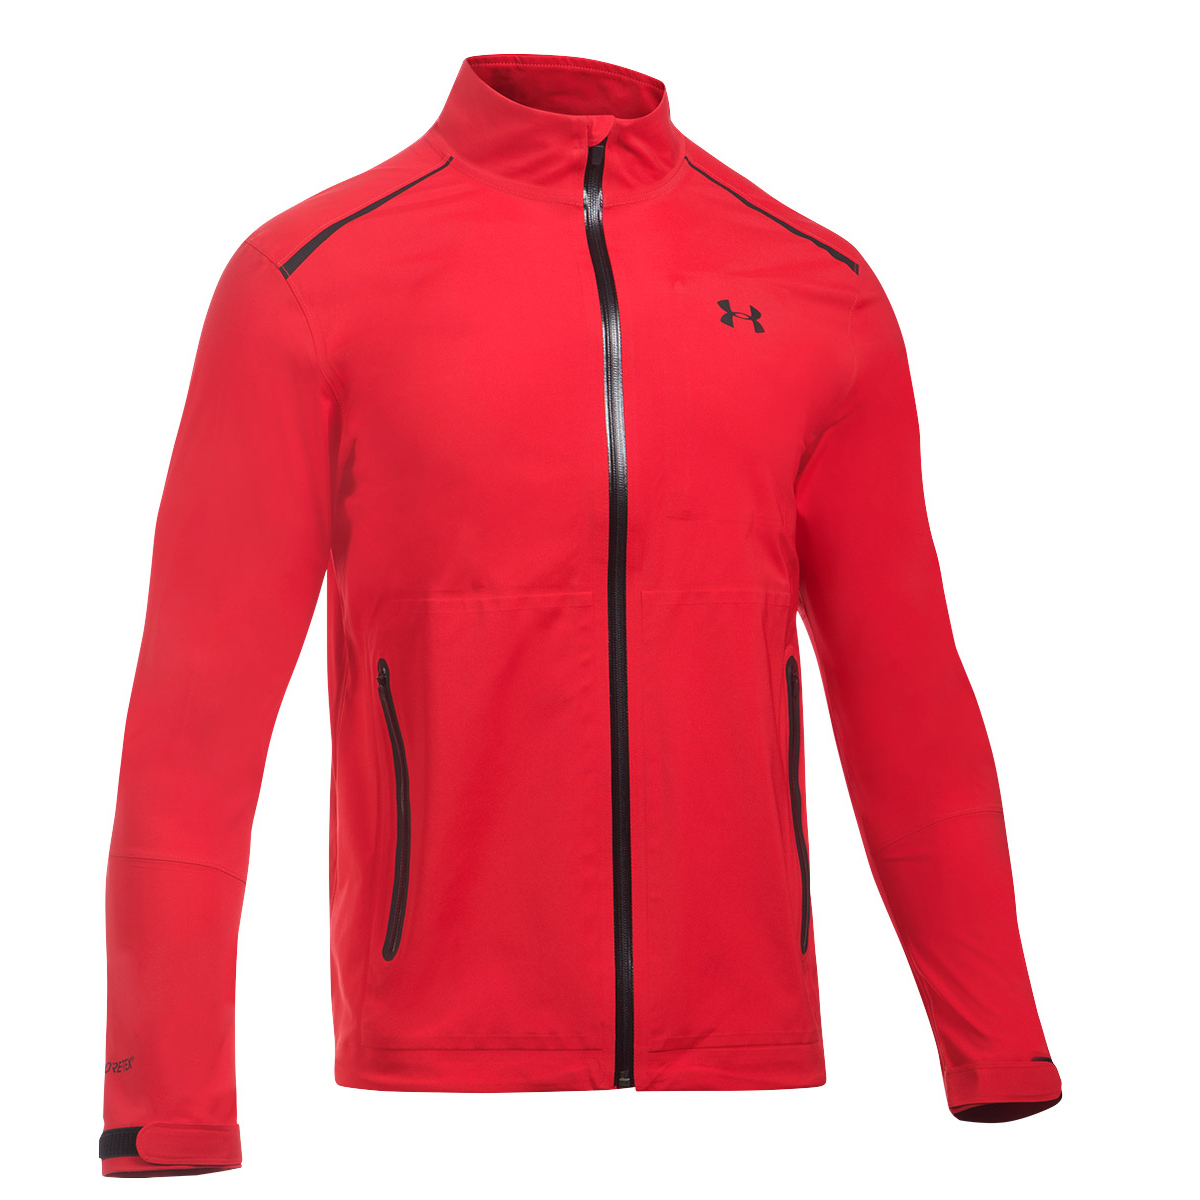 Under Armour GORE-TEX Paclite Jacket from american golf